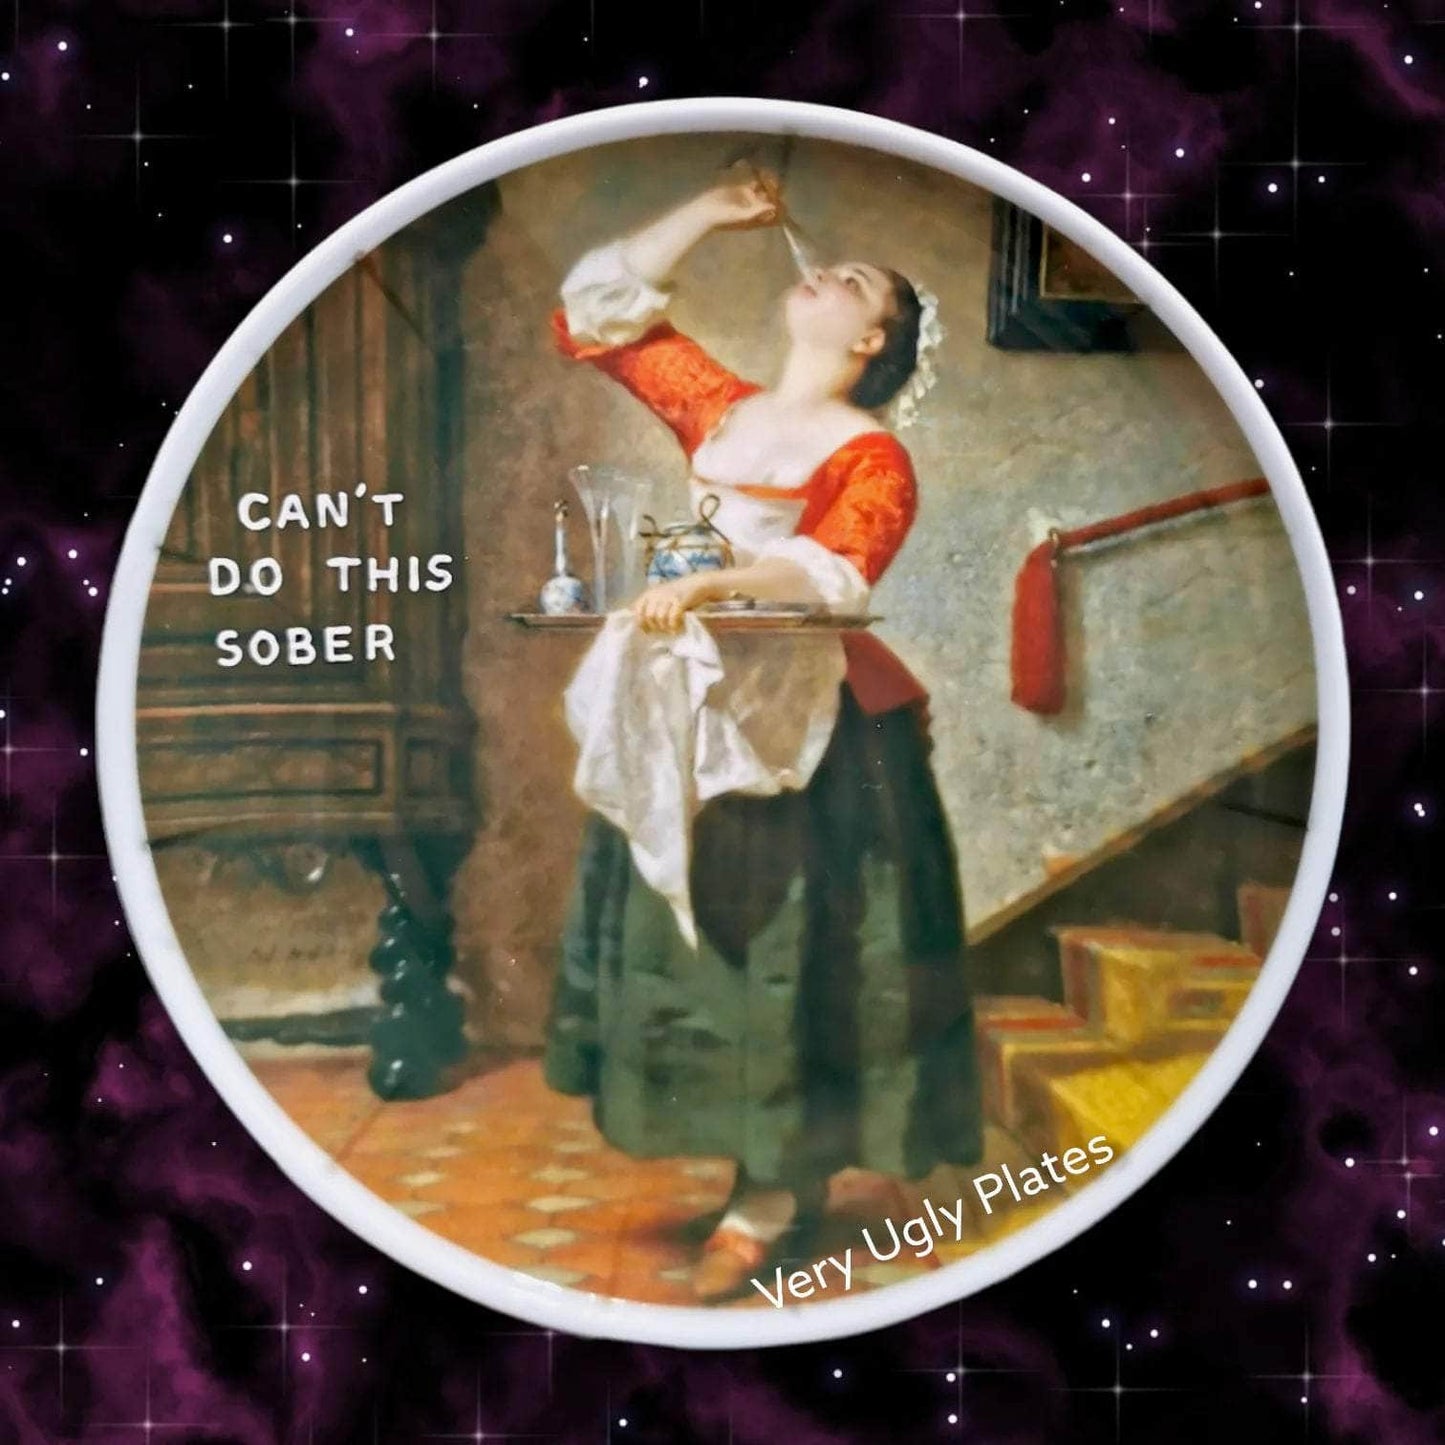 "Can't do this sober" Wall Plate